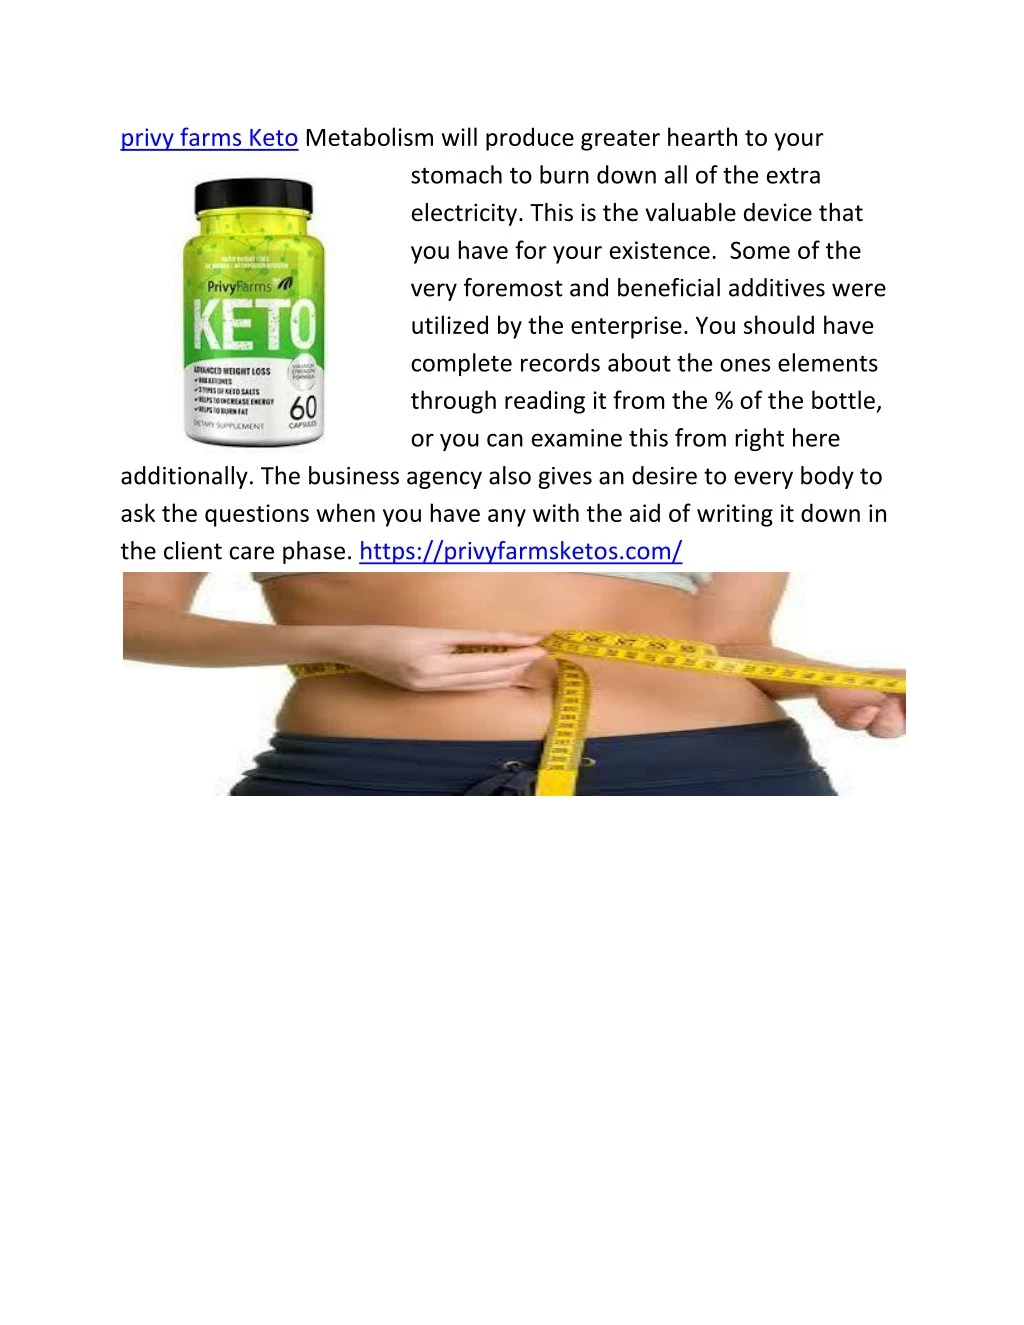 privy farms keto metabolism will produce greater